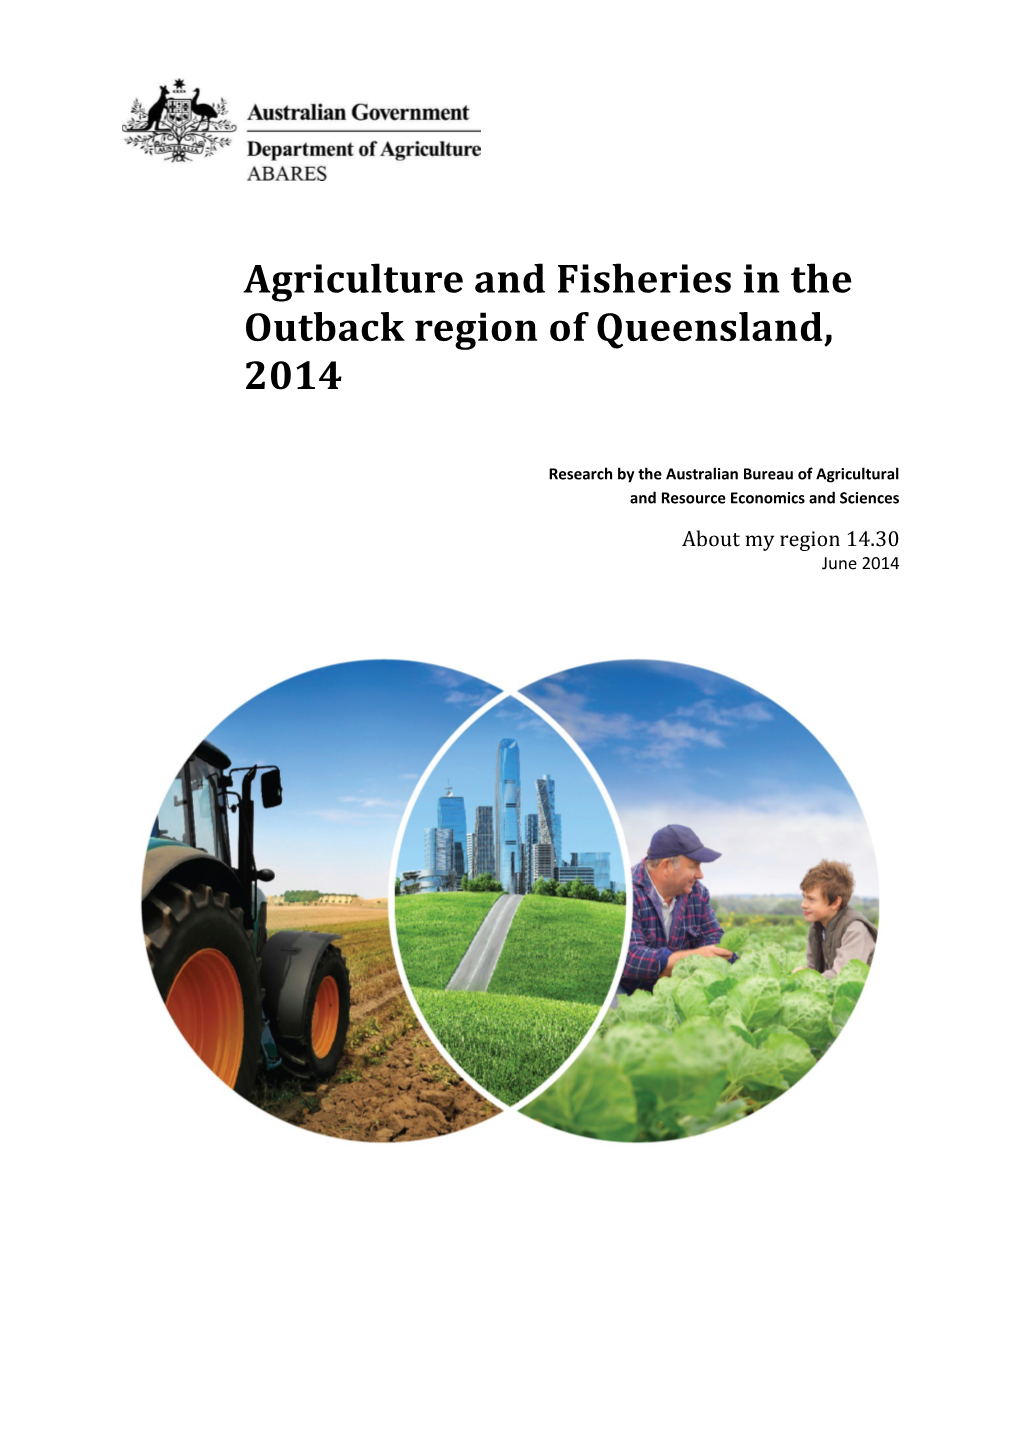 Agriculture and Fisheries in the Outback Region of Queensland, 2014